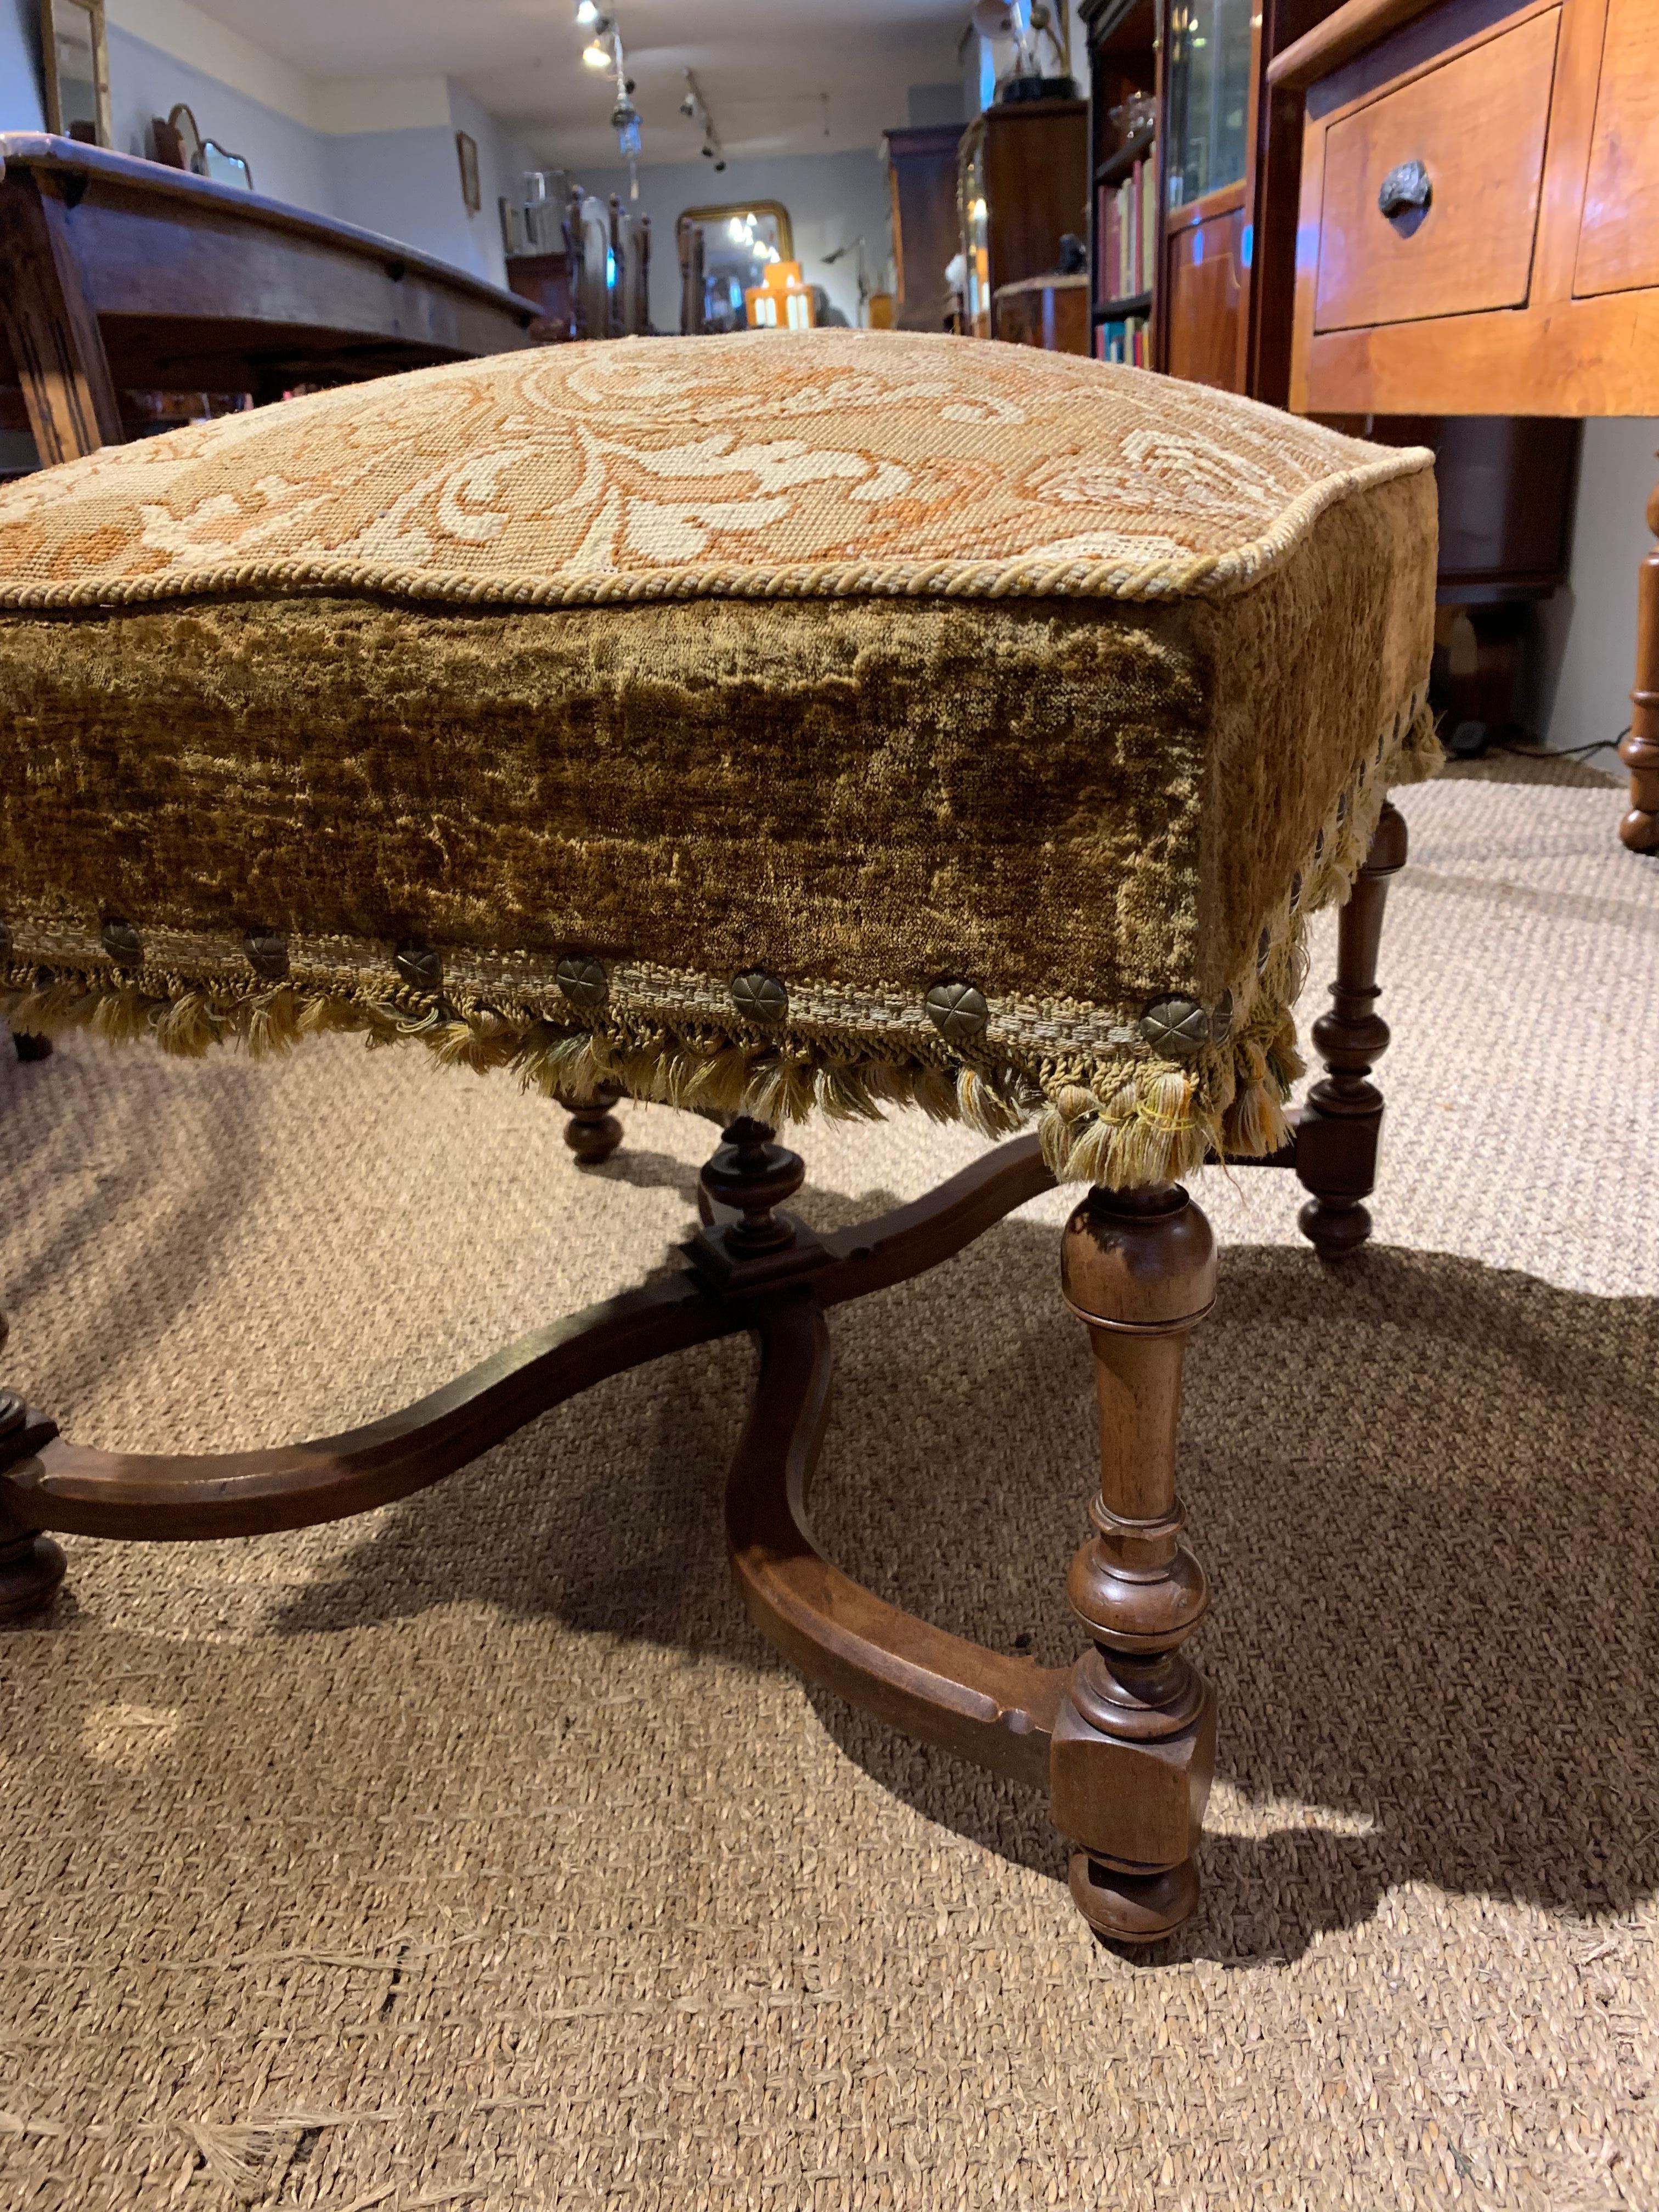 Late 19th century walnut foot stool 

French circa 1890, with original tapestry cover 

Measures: Height 21 inches 
Width 20 inches
Depth 20 inches.